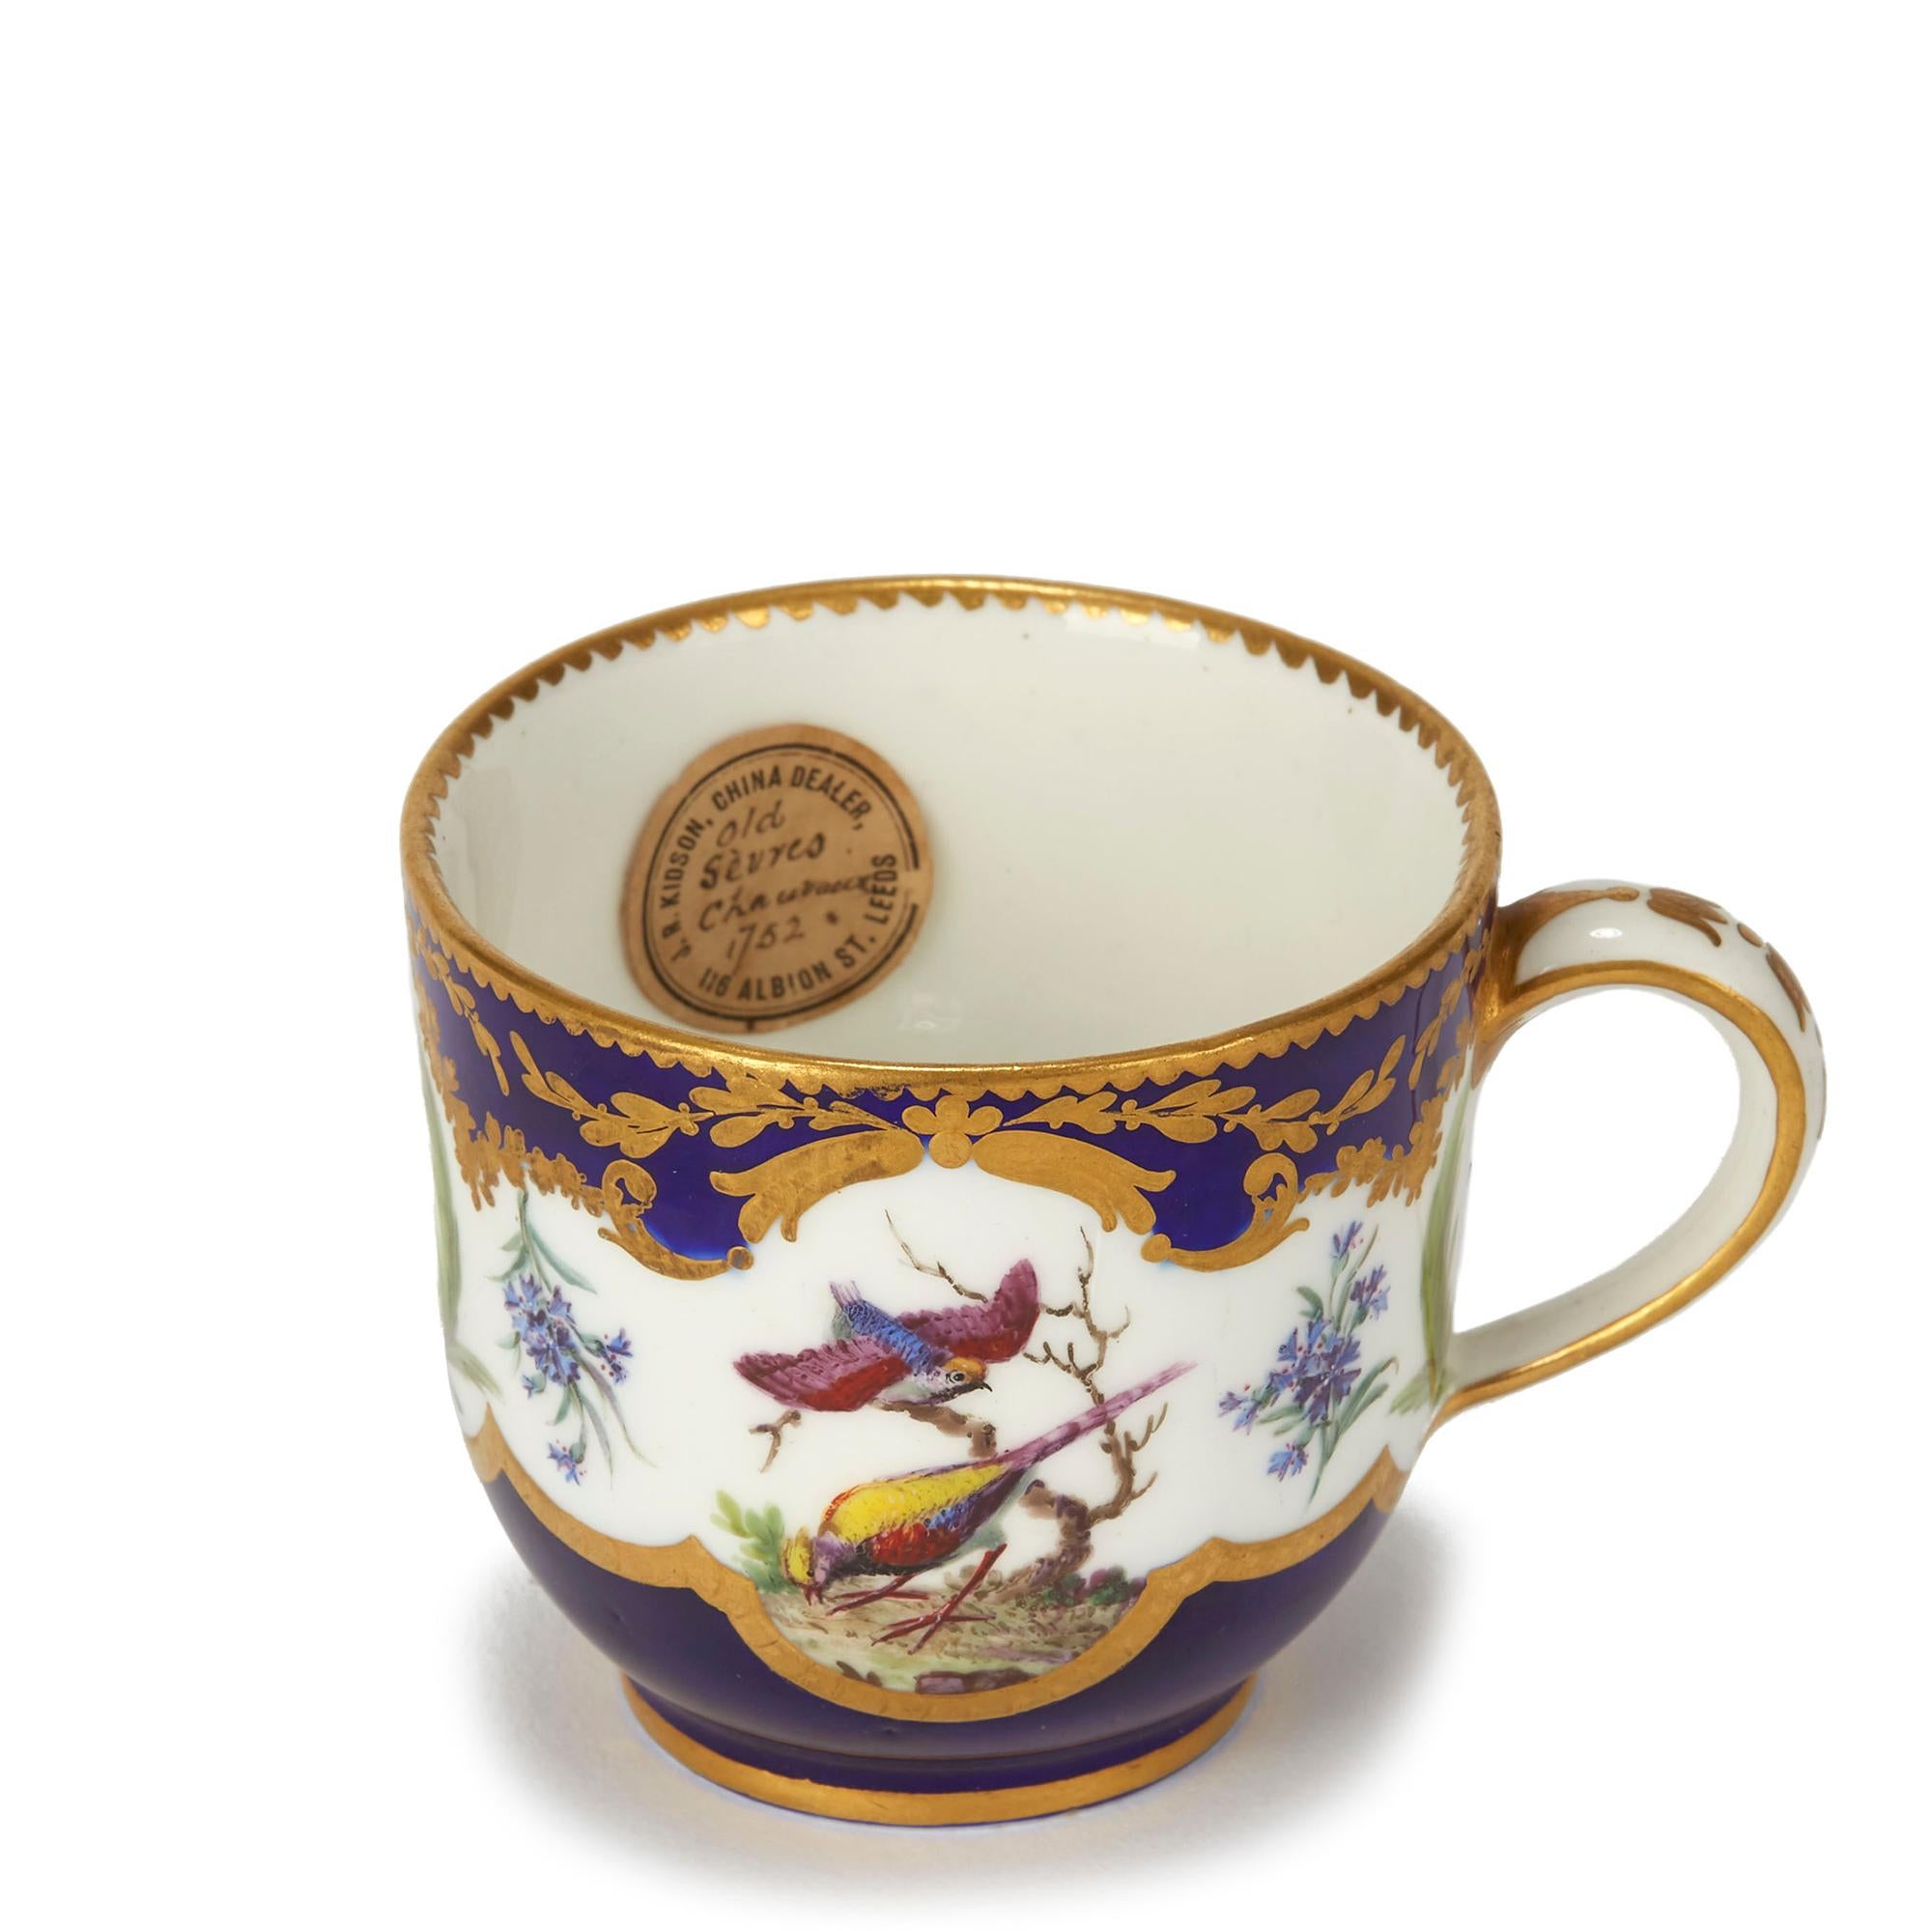 Sèvres French Porcelain Hand Painted and Gilded Teacup, circa 1752 3